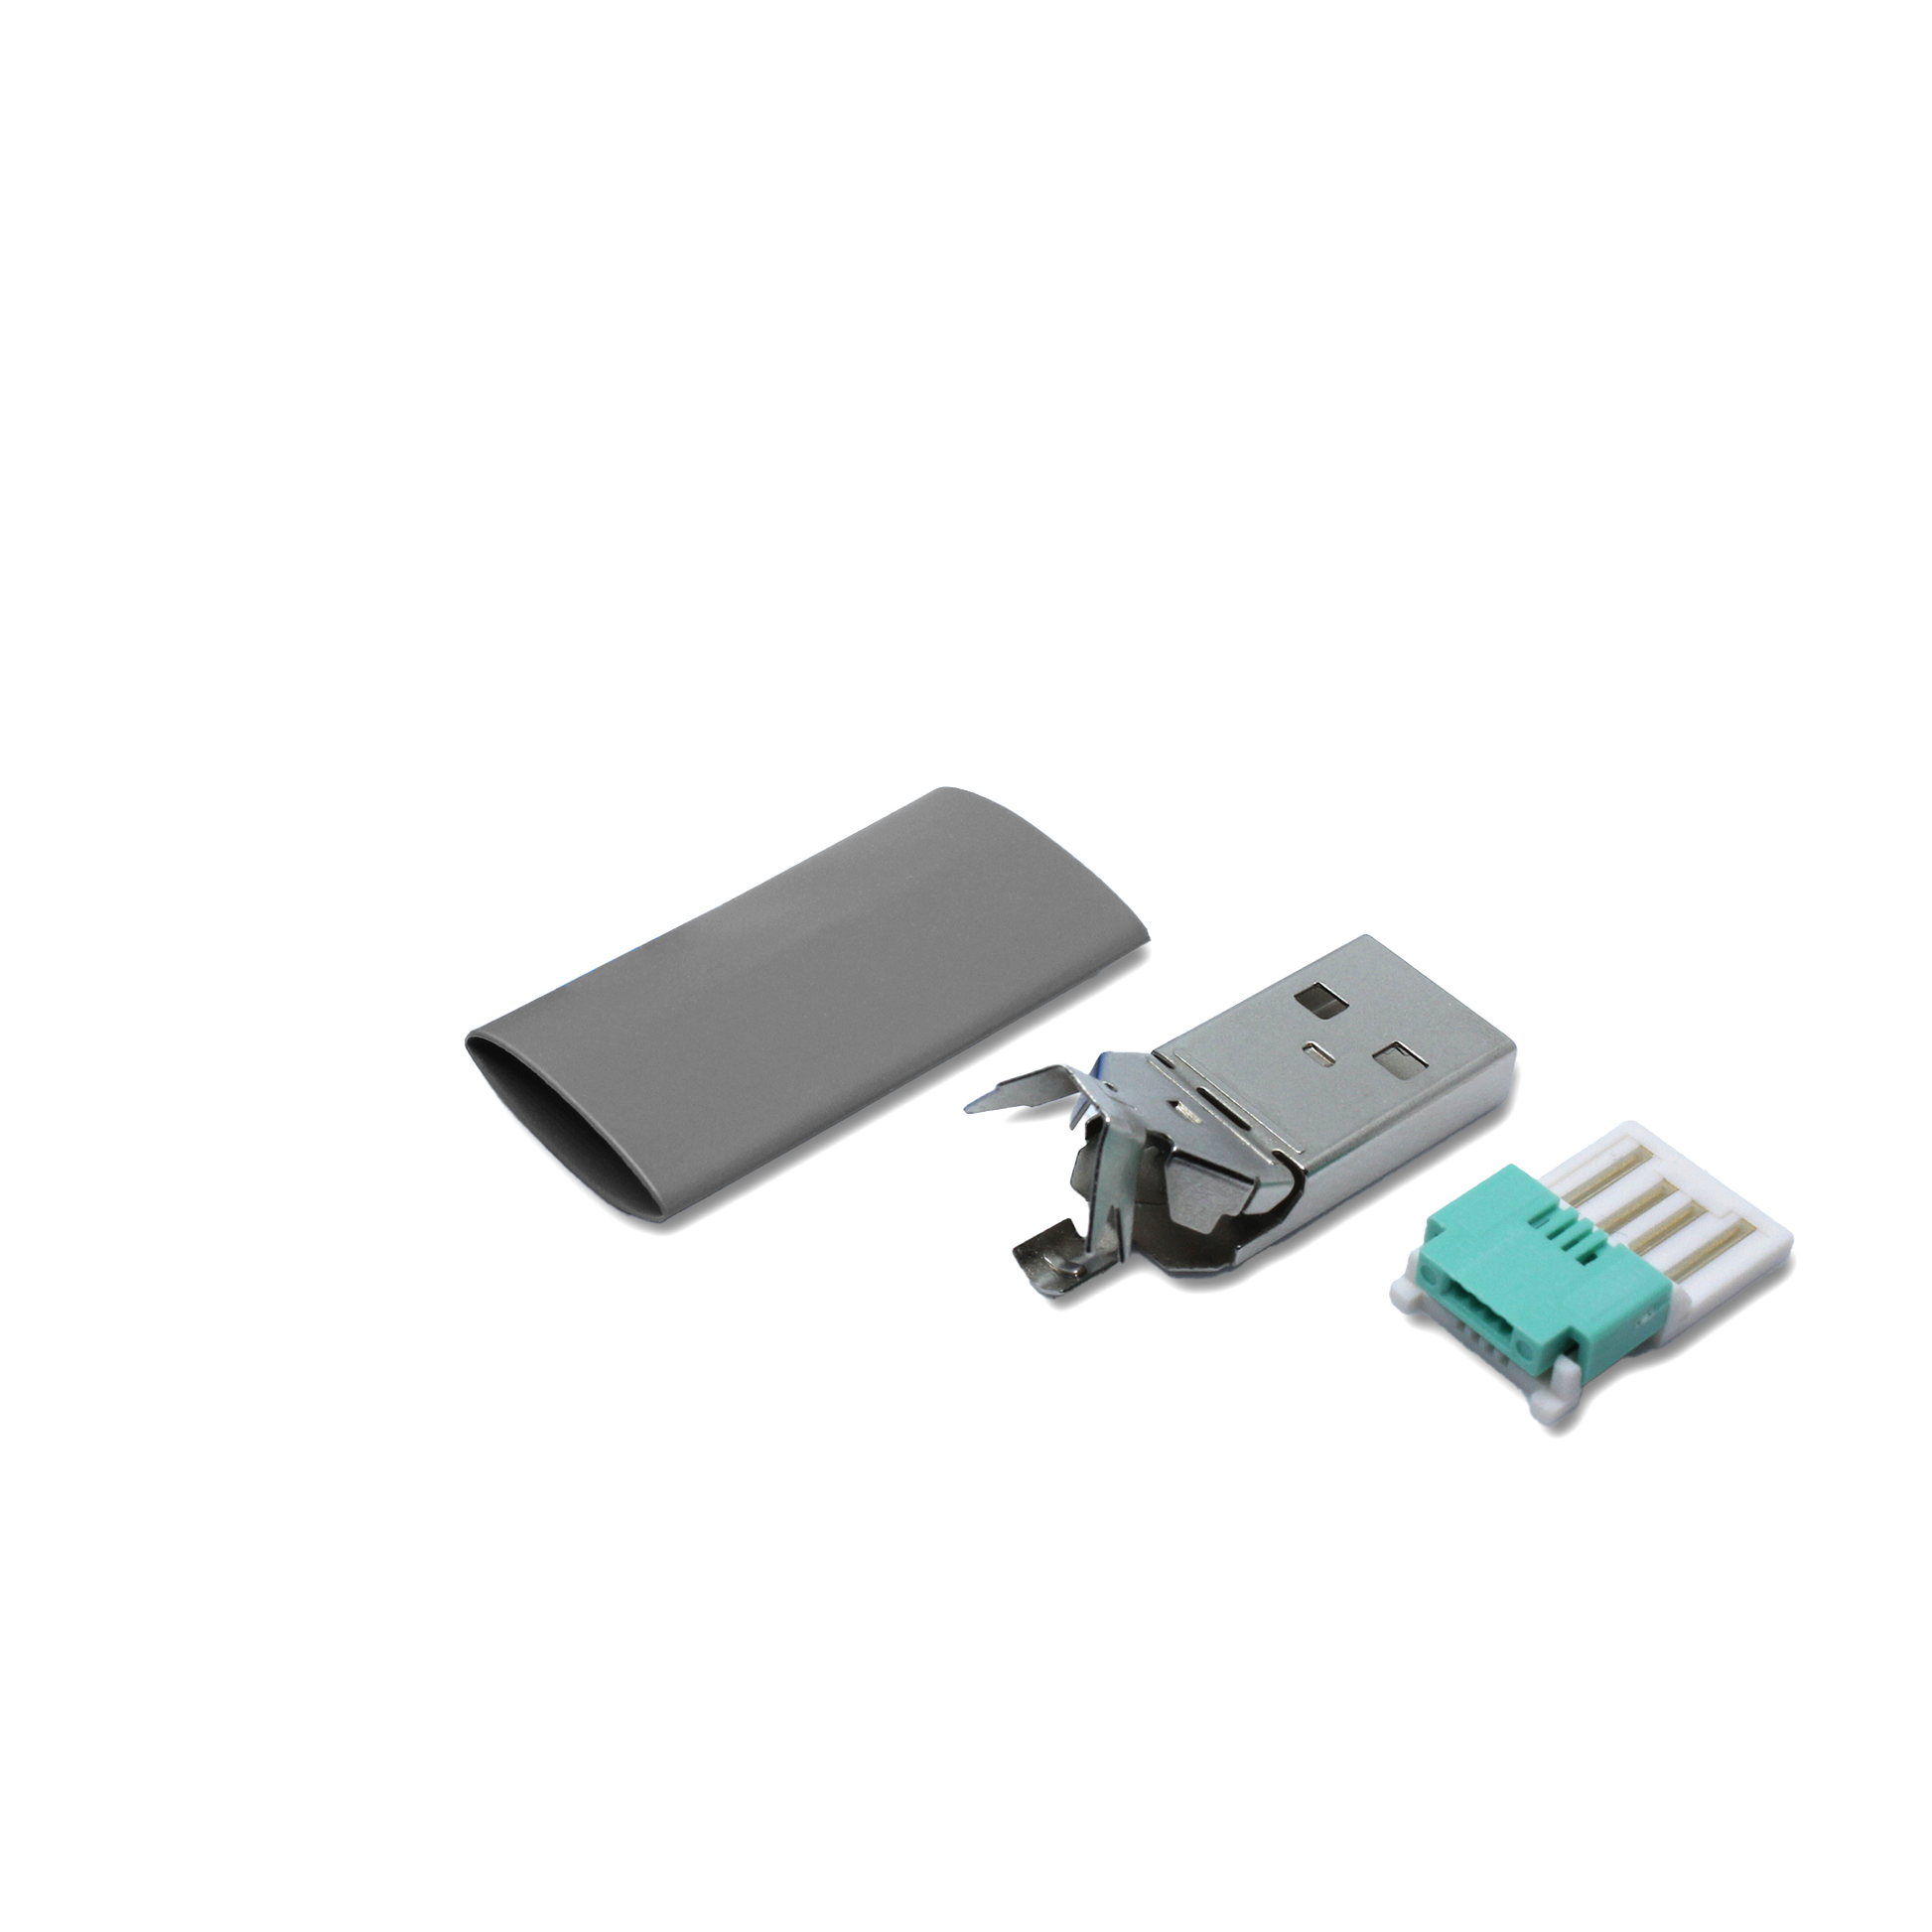 Individual parts USB A plug in grey, the spare part can be used to repair a USB 2.0 cable without soldering (crimping)